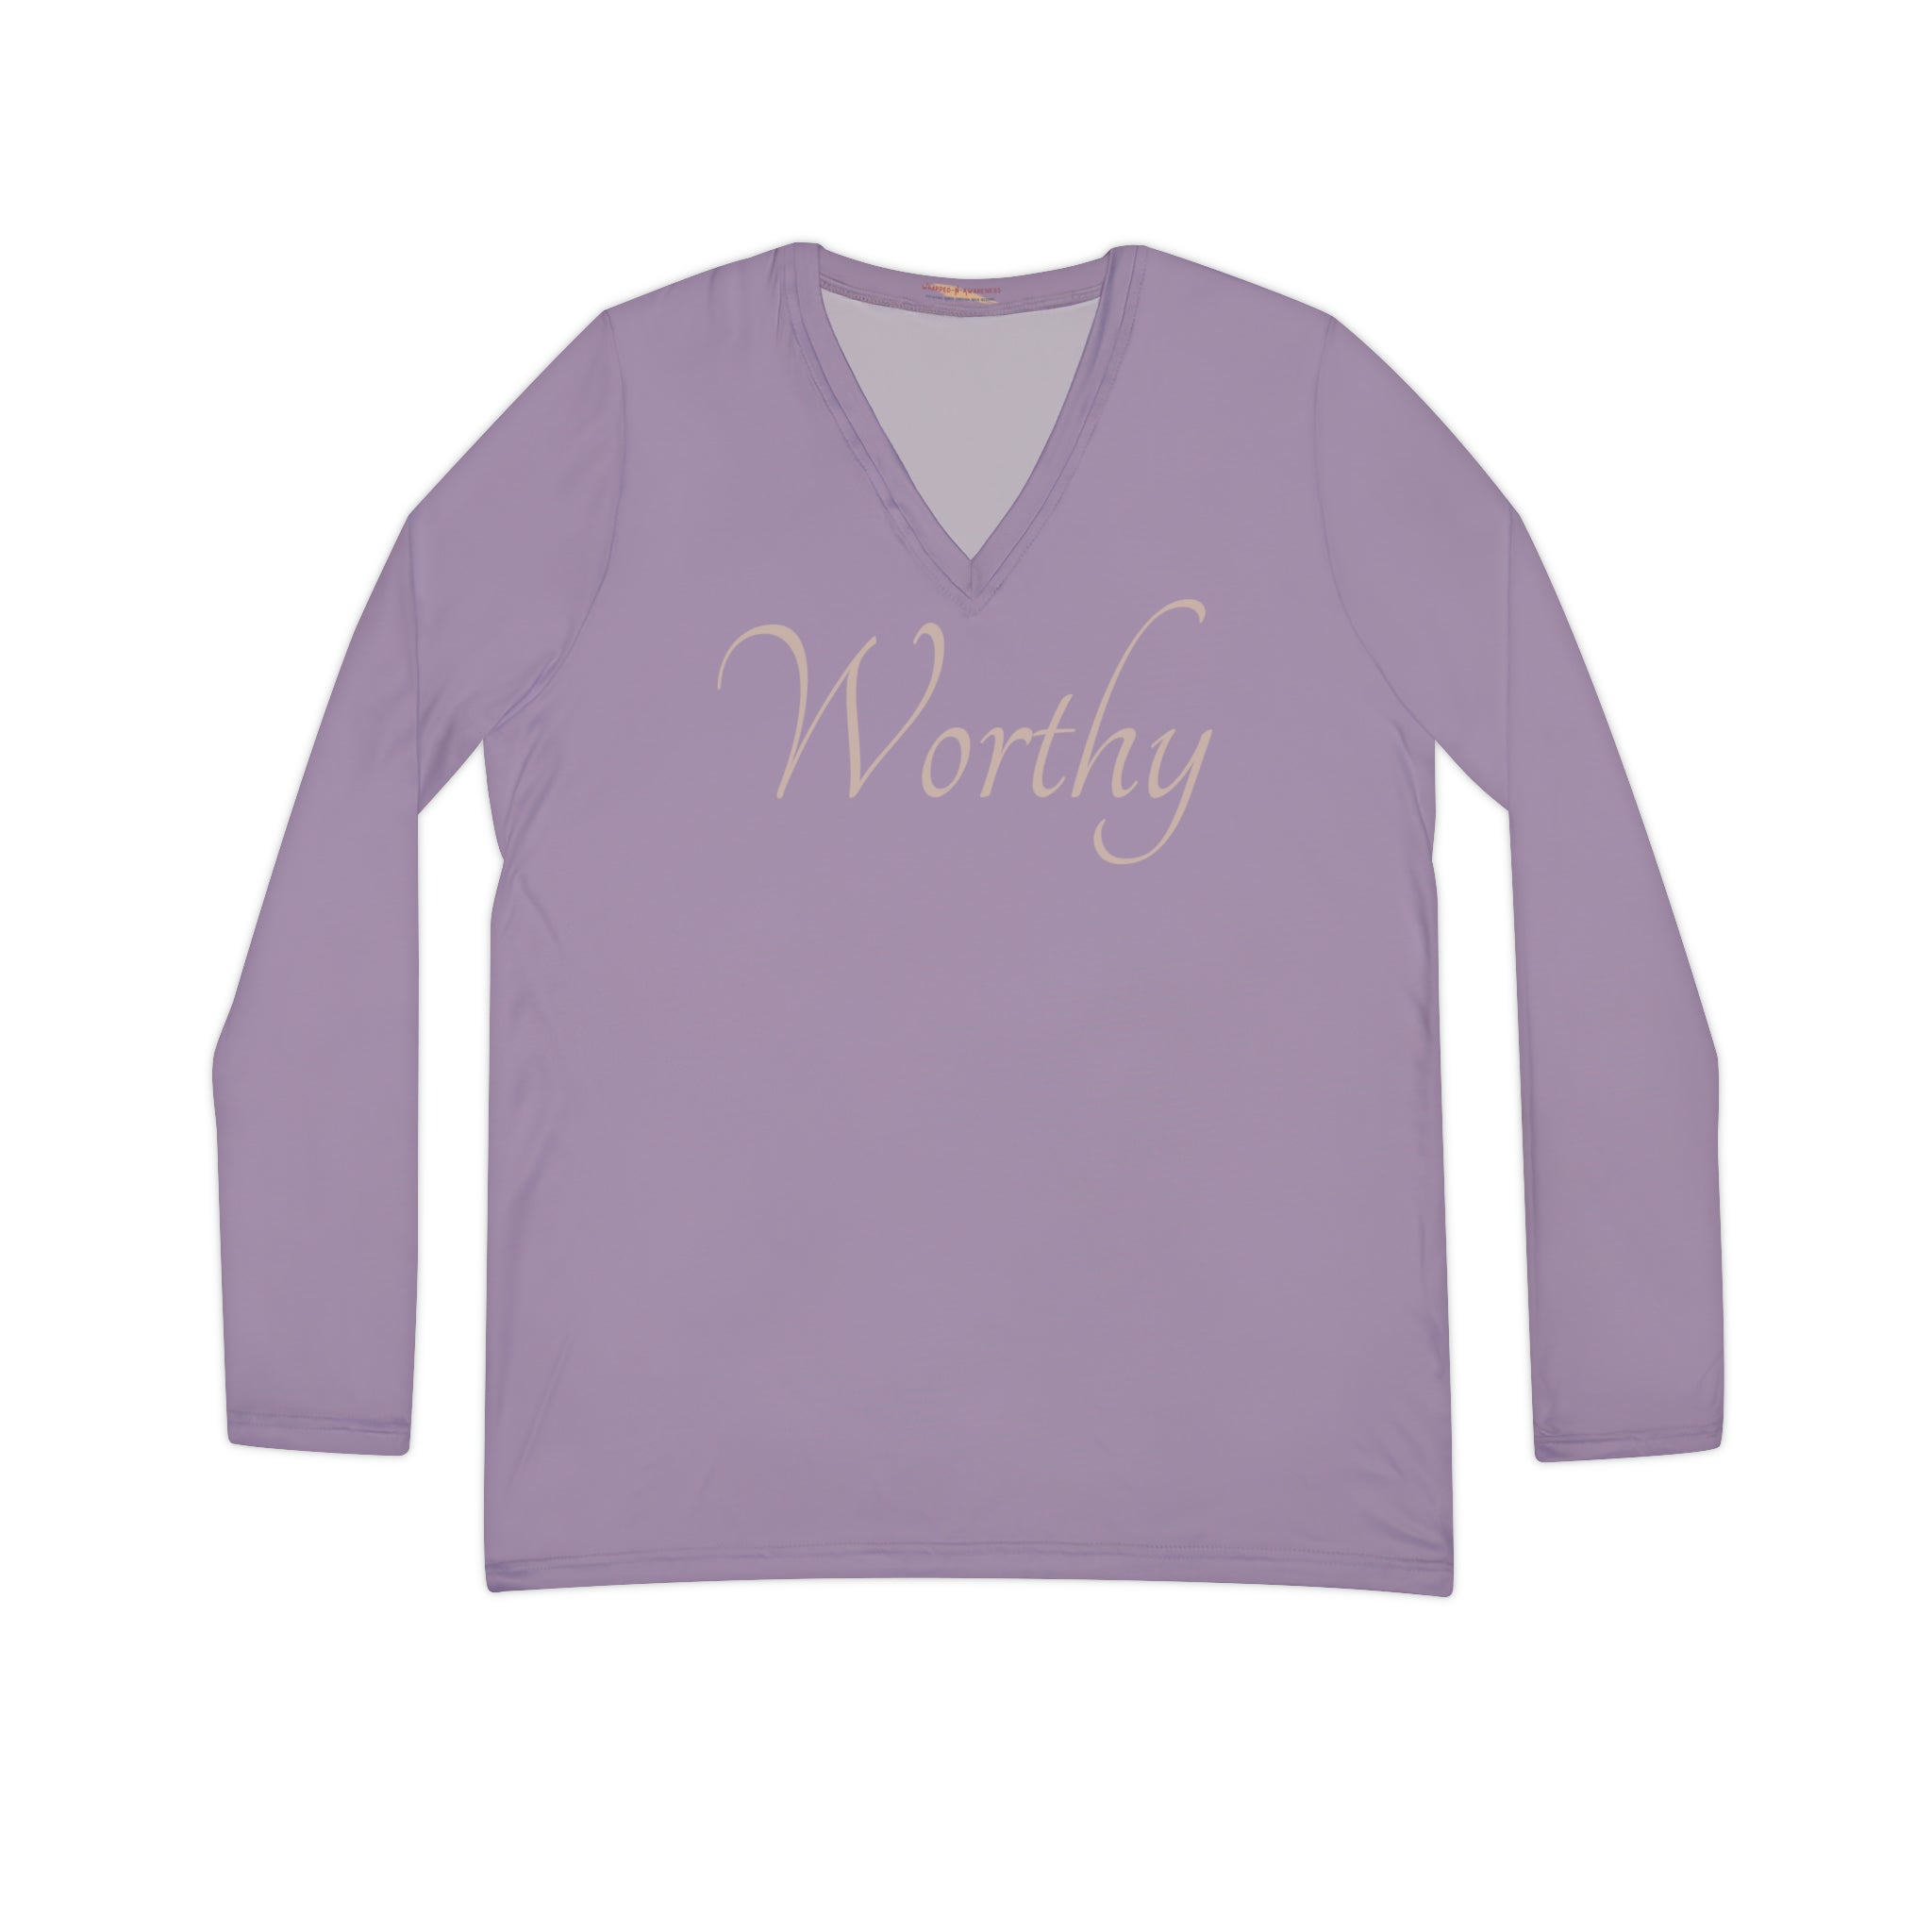 Worthy Long Sleeve Affirmation V-neck Casual Shirt Double Needle Stitching Everyday Wear Mental Health Support Polyester Spandex Blend Statement Shirt Worthy Shirt All Over Prints 12982408948875239506_2048 Printify